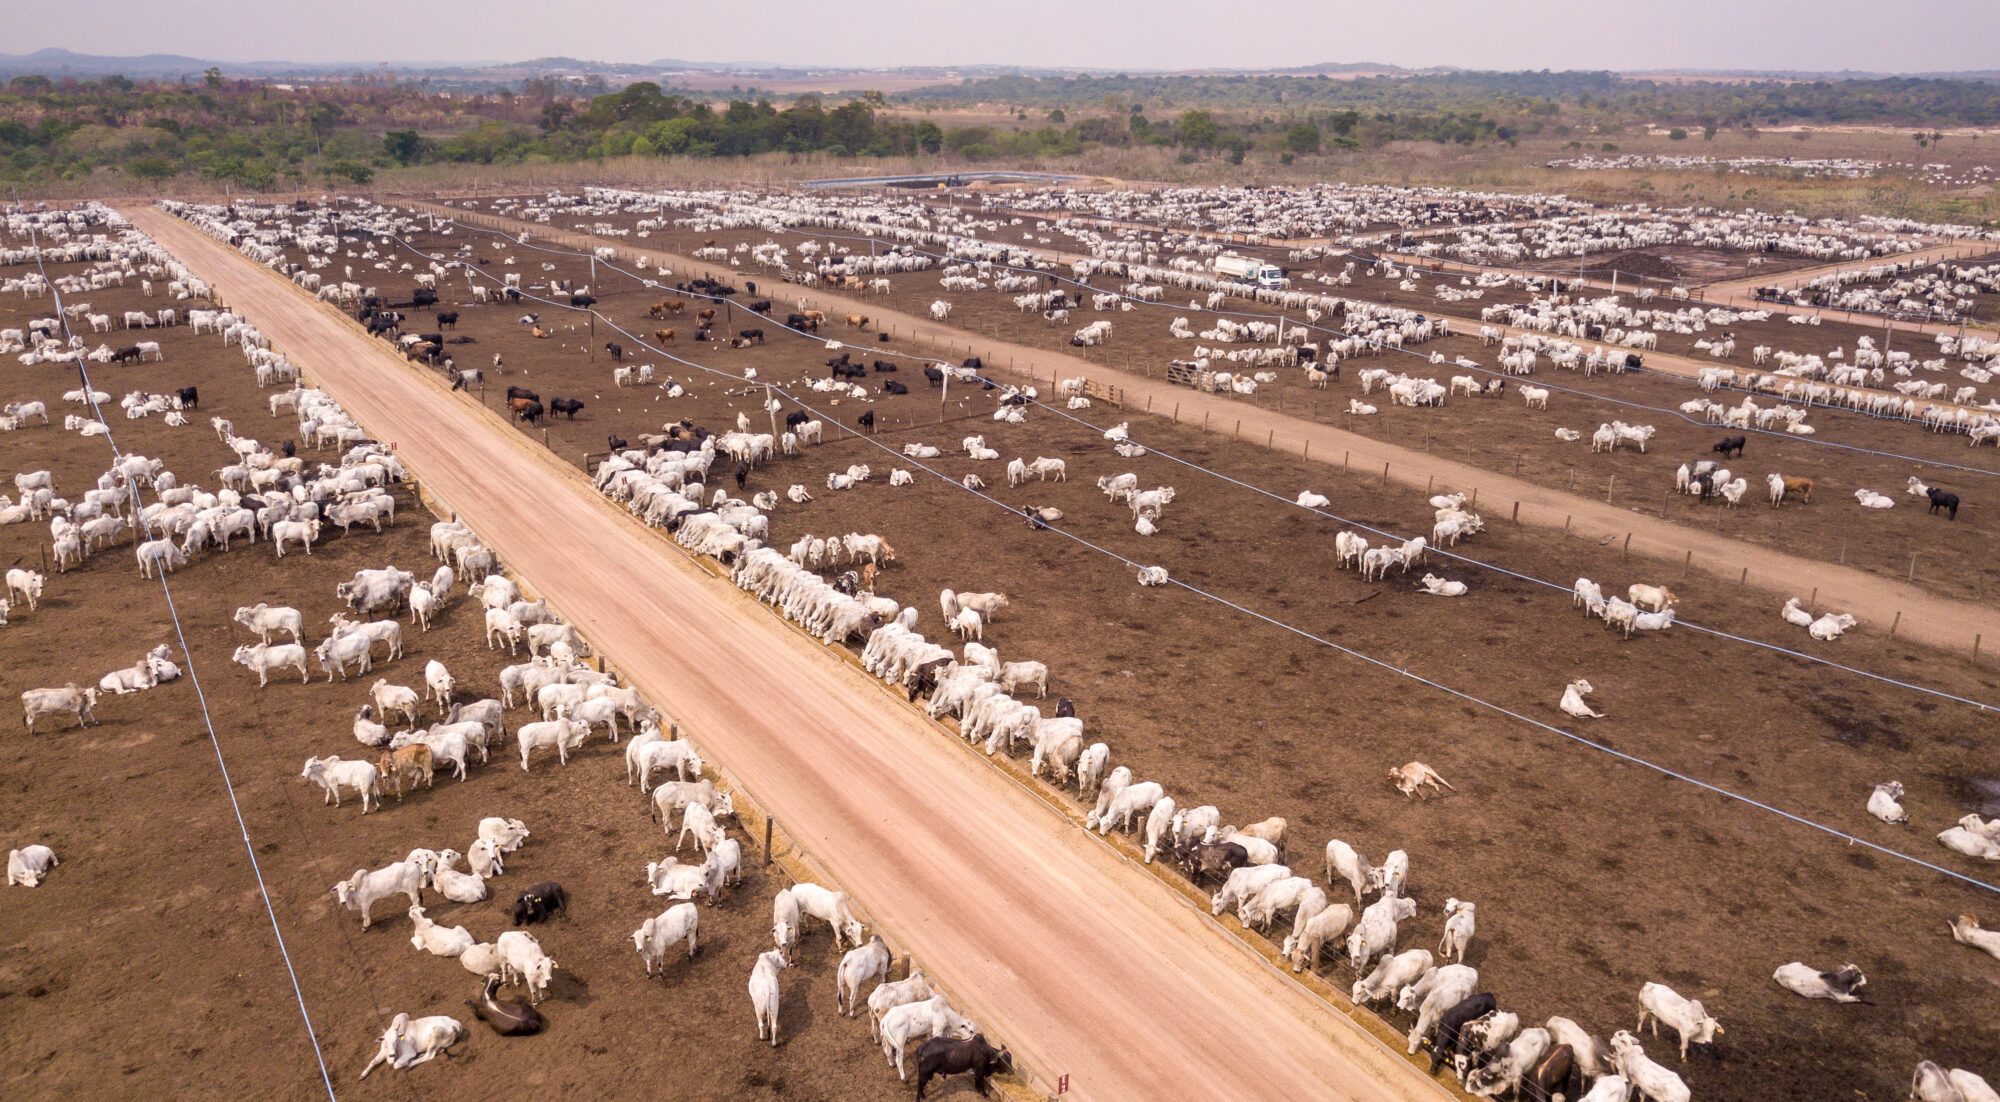 A cattle feedlot in a previously forested area in Para, Brazil